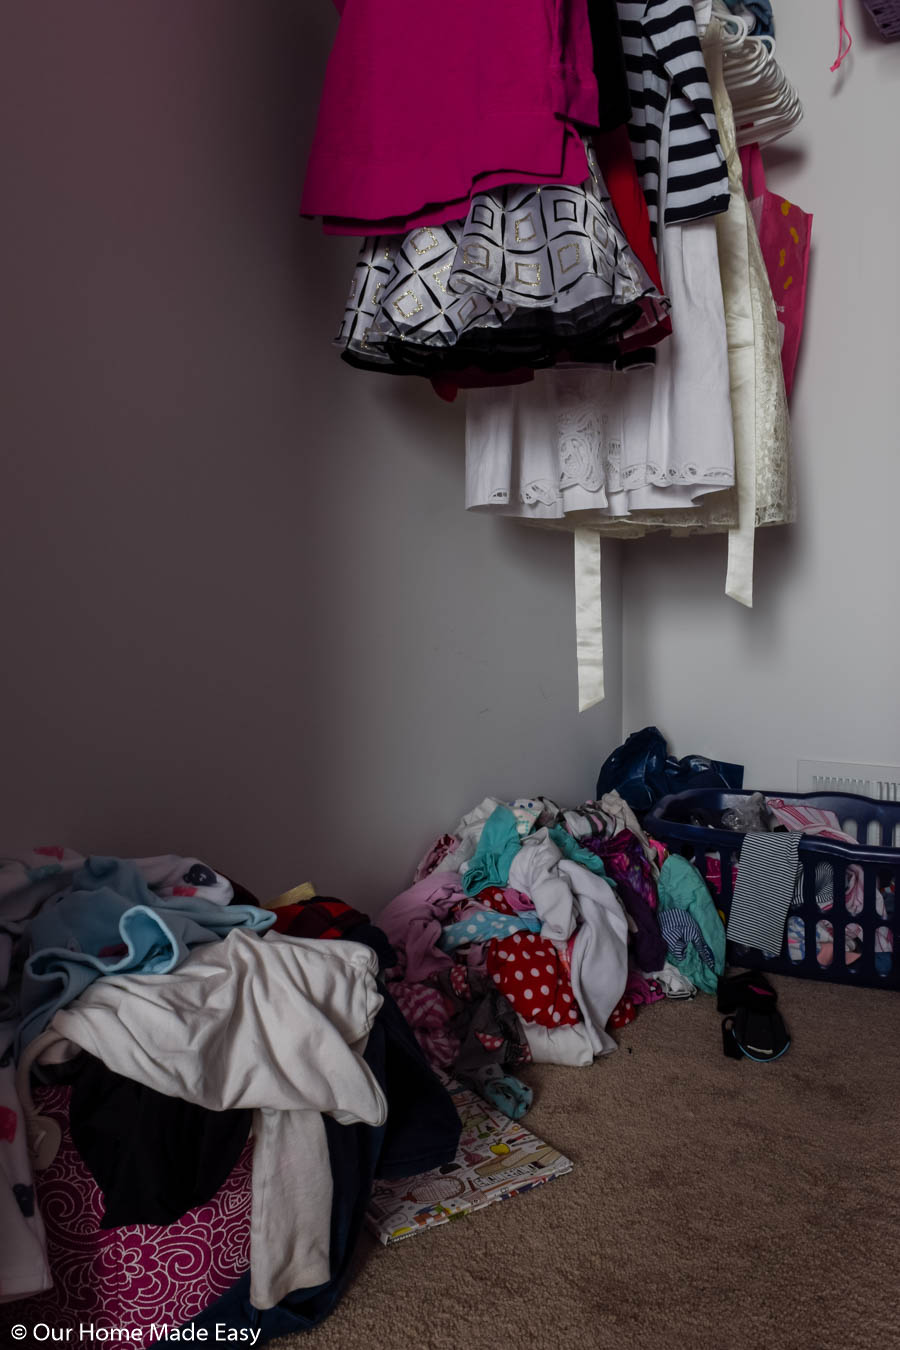 This small walk-in closet in our daughter's room lacked storage solutions and needed a makeover